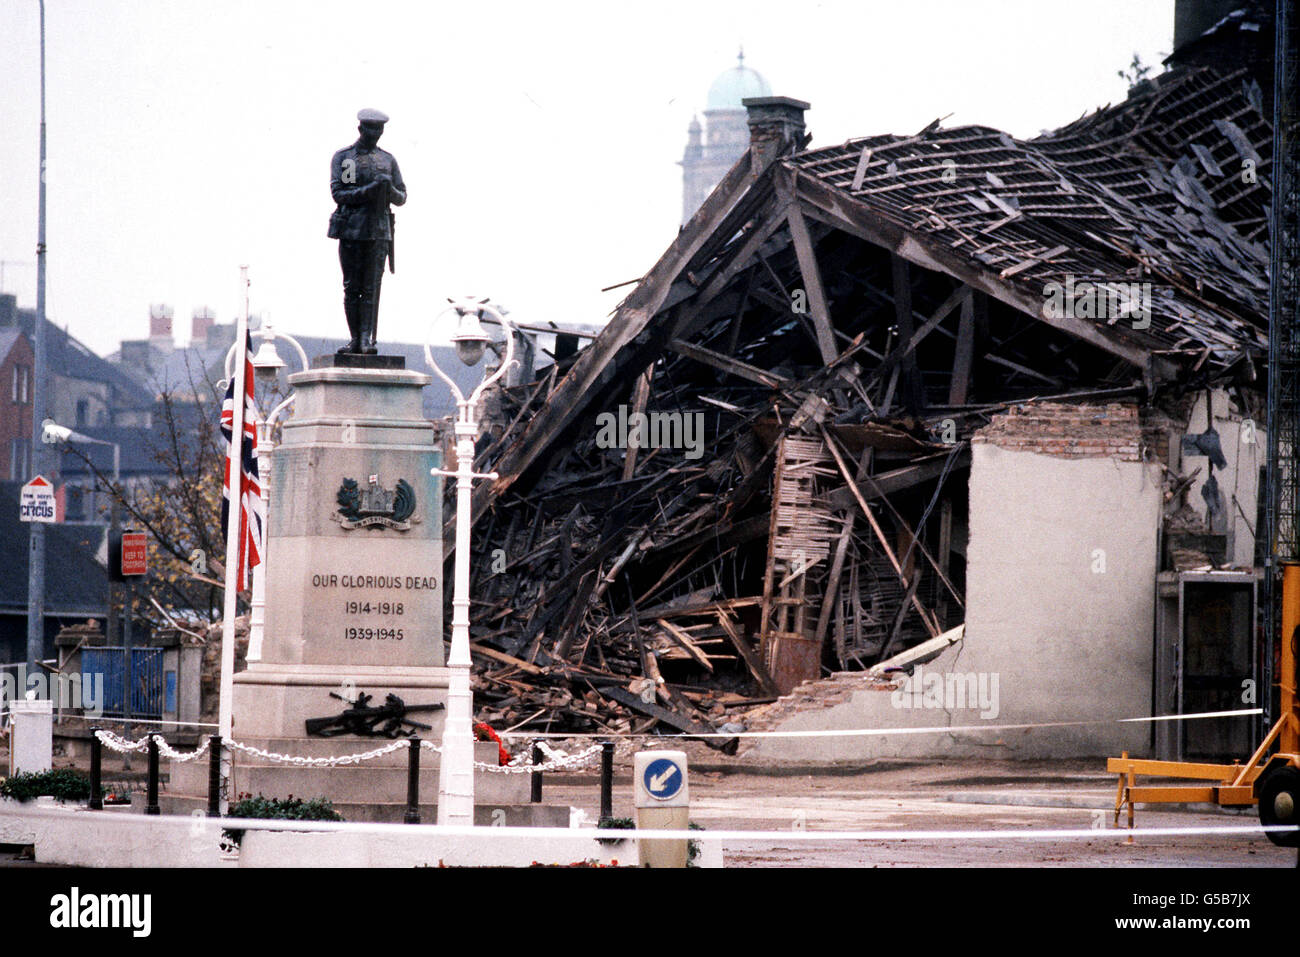 1987: The Cenotaph at Enniskillen with the devastated community centre in the background. 11 people died and more than 50 were injured in a massive IRA bomb explosion just before a Remembrance Day ceremony took place in the Co. Fermanagh town of Enniskillen. *16/07/02 The Cenotaph at Enniskillen with the devastated community centre in the background.where 11 people died and more than 50 were injured in a massive IRA bomb explosion just before a Remembrance Day ceremony. The IRA has apologised Friday July 16, 2002, for the killing of all 'non-combatants' who died during its campaign of terror. Stock Photo